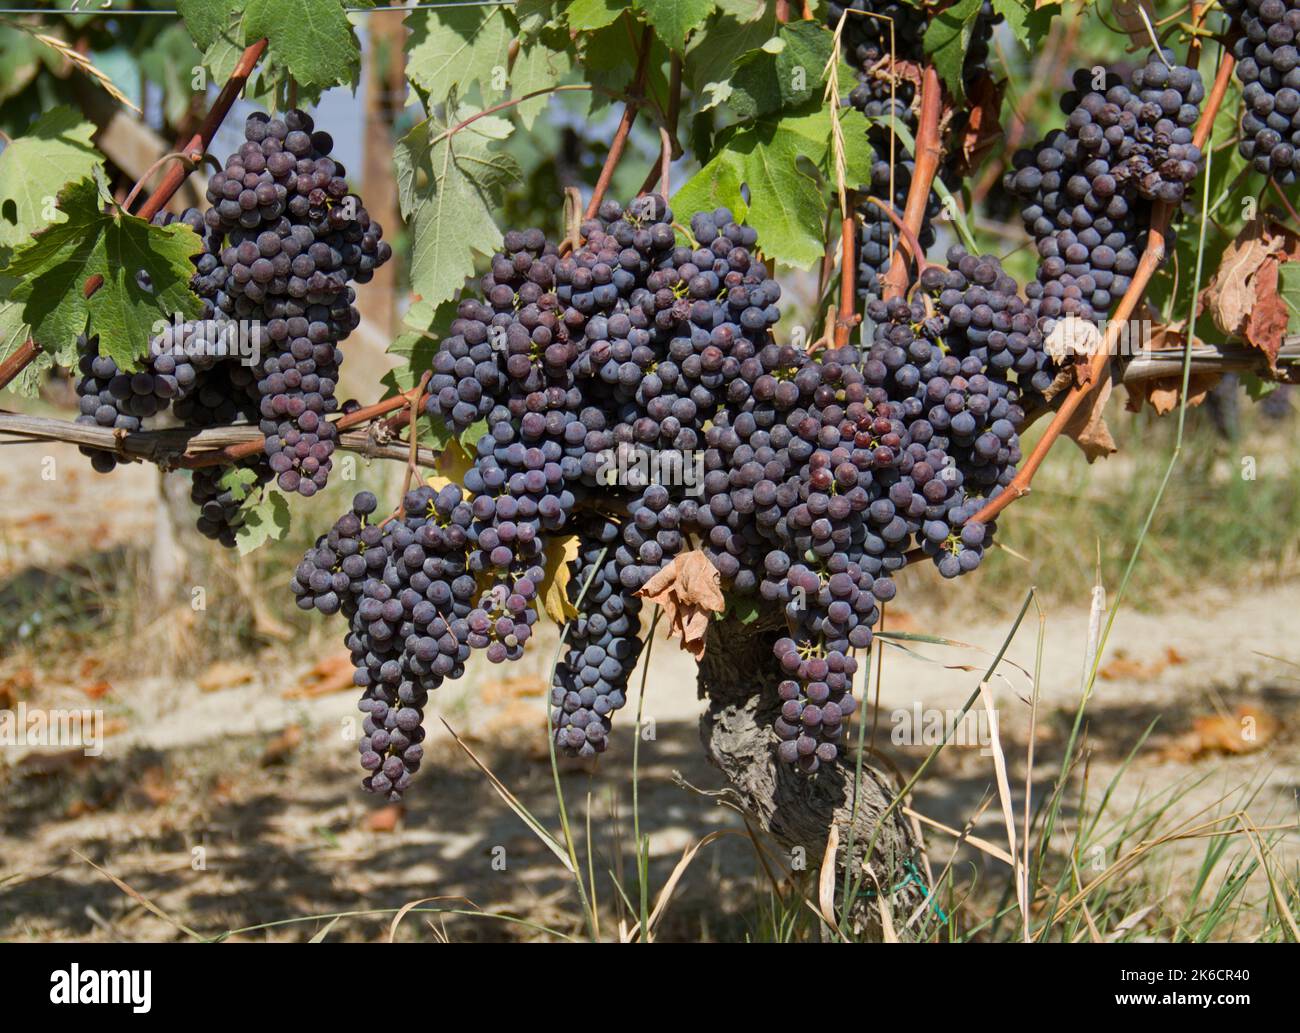 Blue bunches of grapes in a vineyard Stock Photo